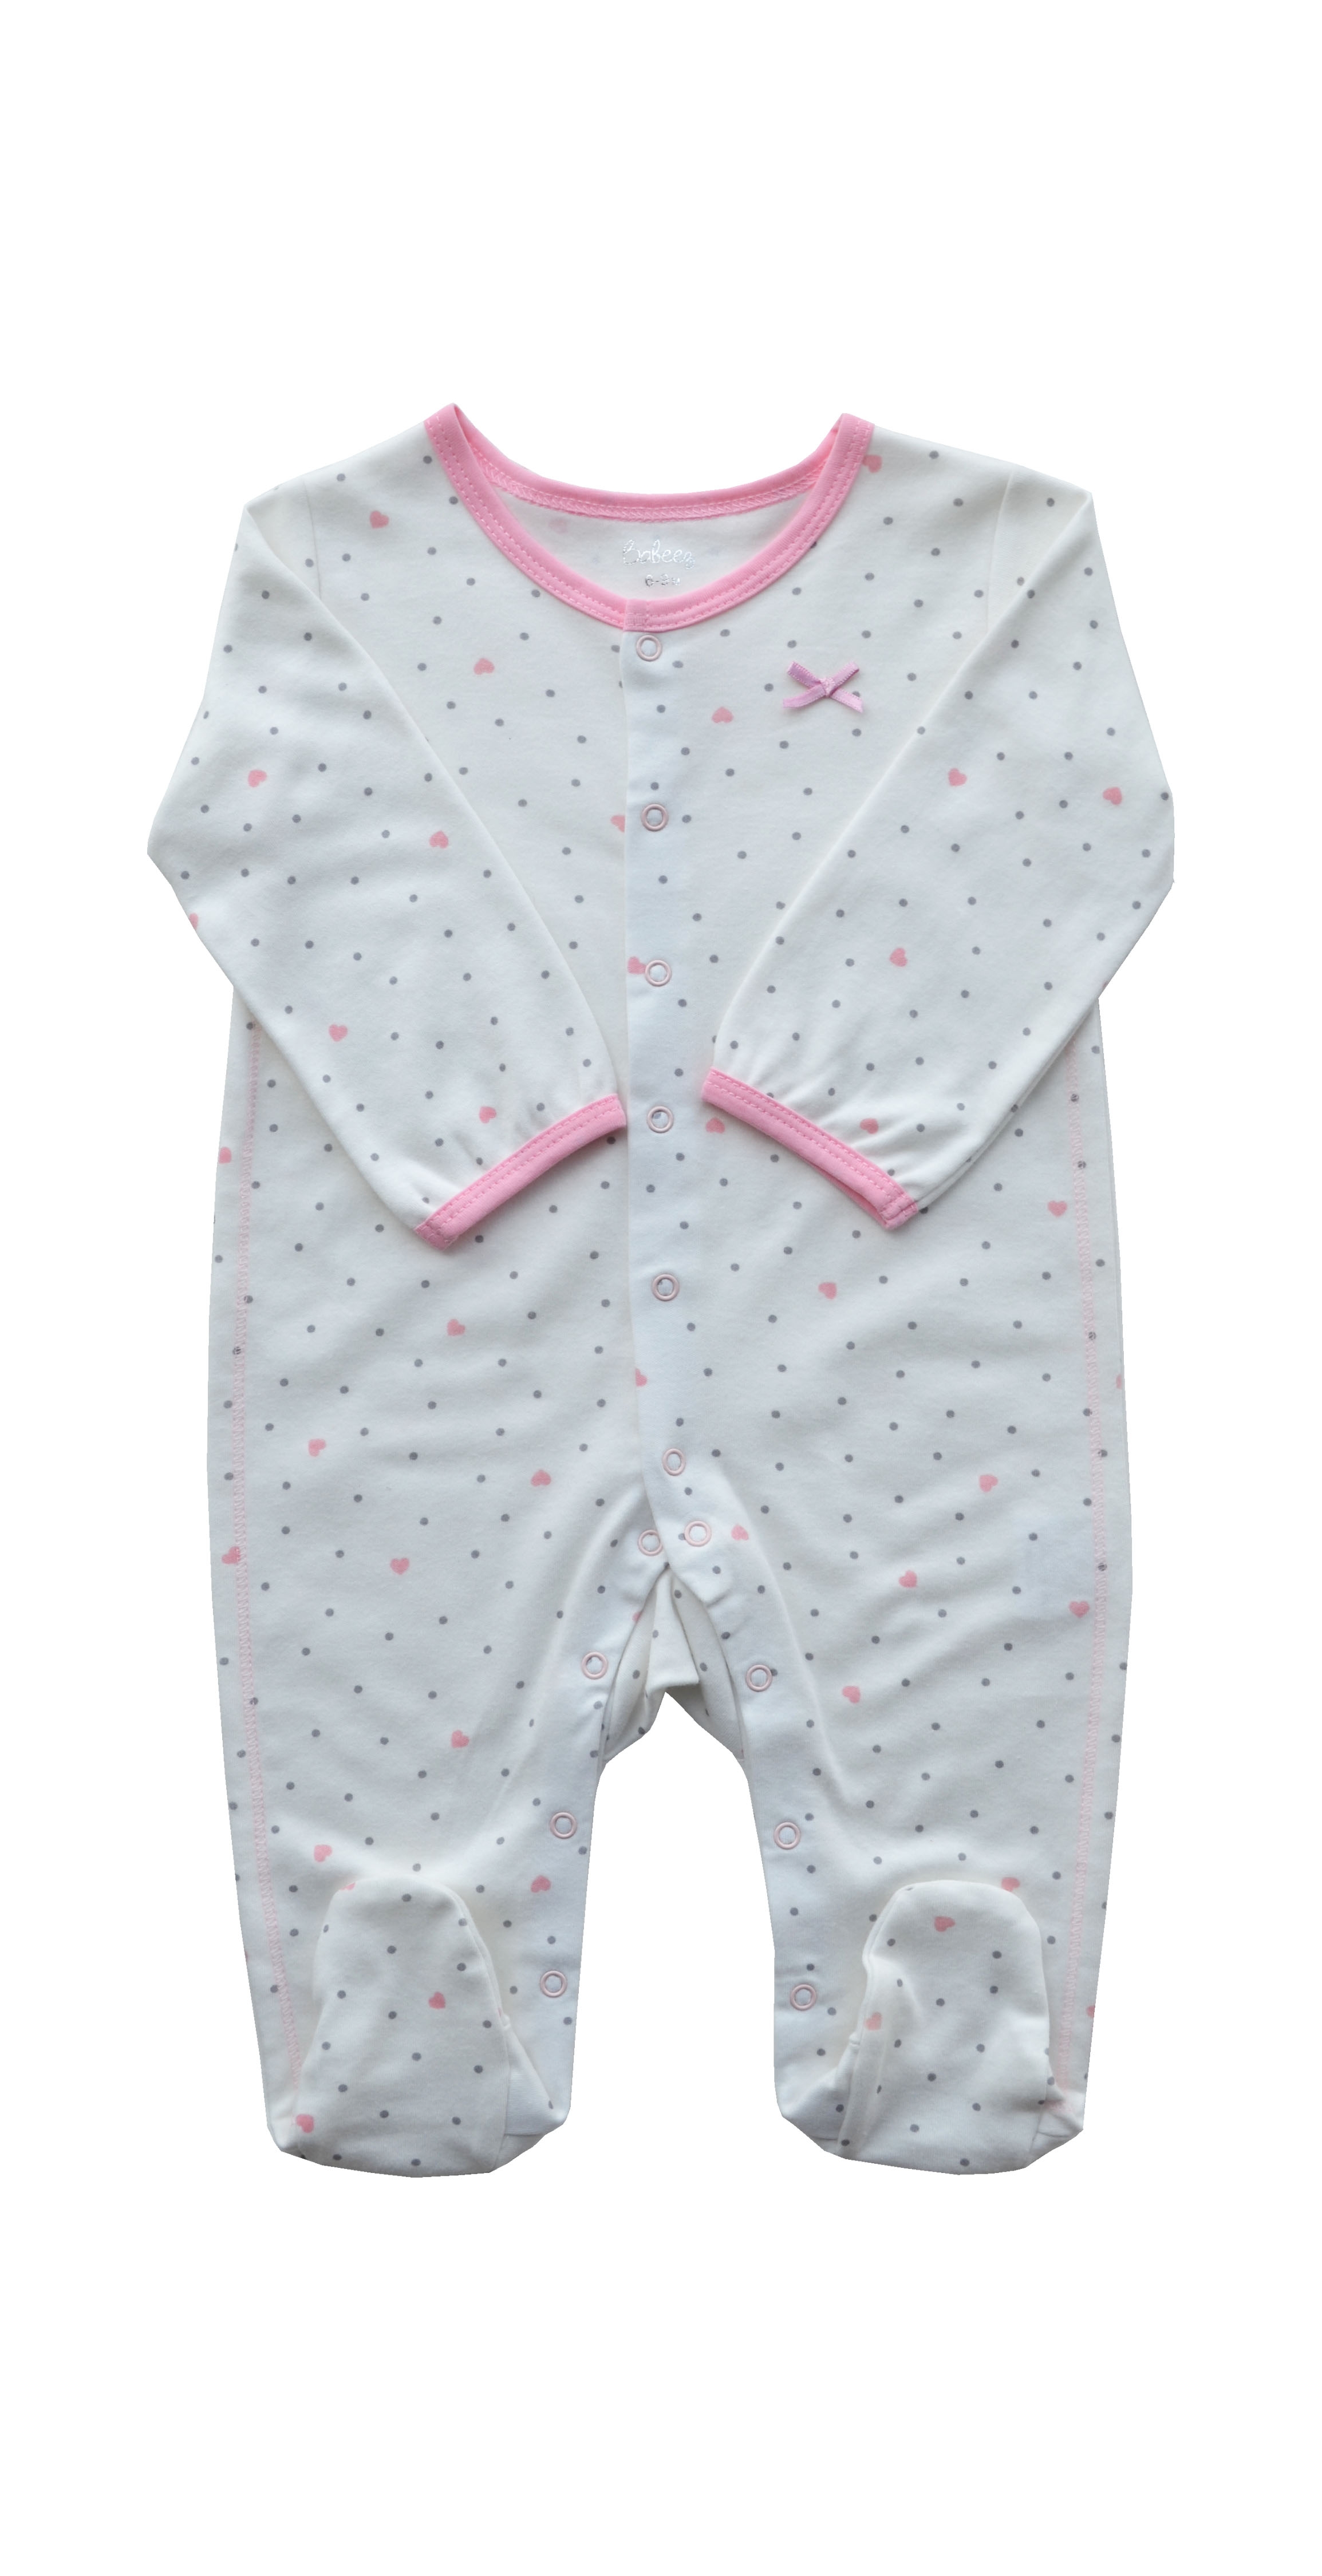 Babeez | Allover Dots and Heart Print on Offwhite Sleeper with Feet(100% Cotton Interlock) undefined